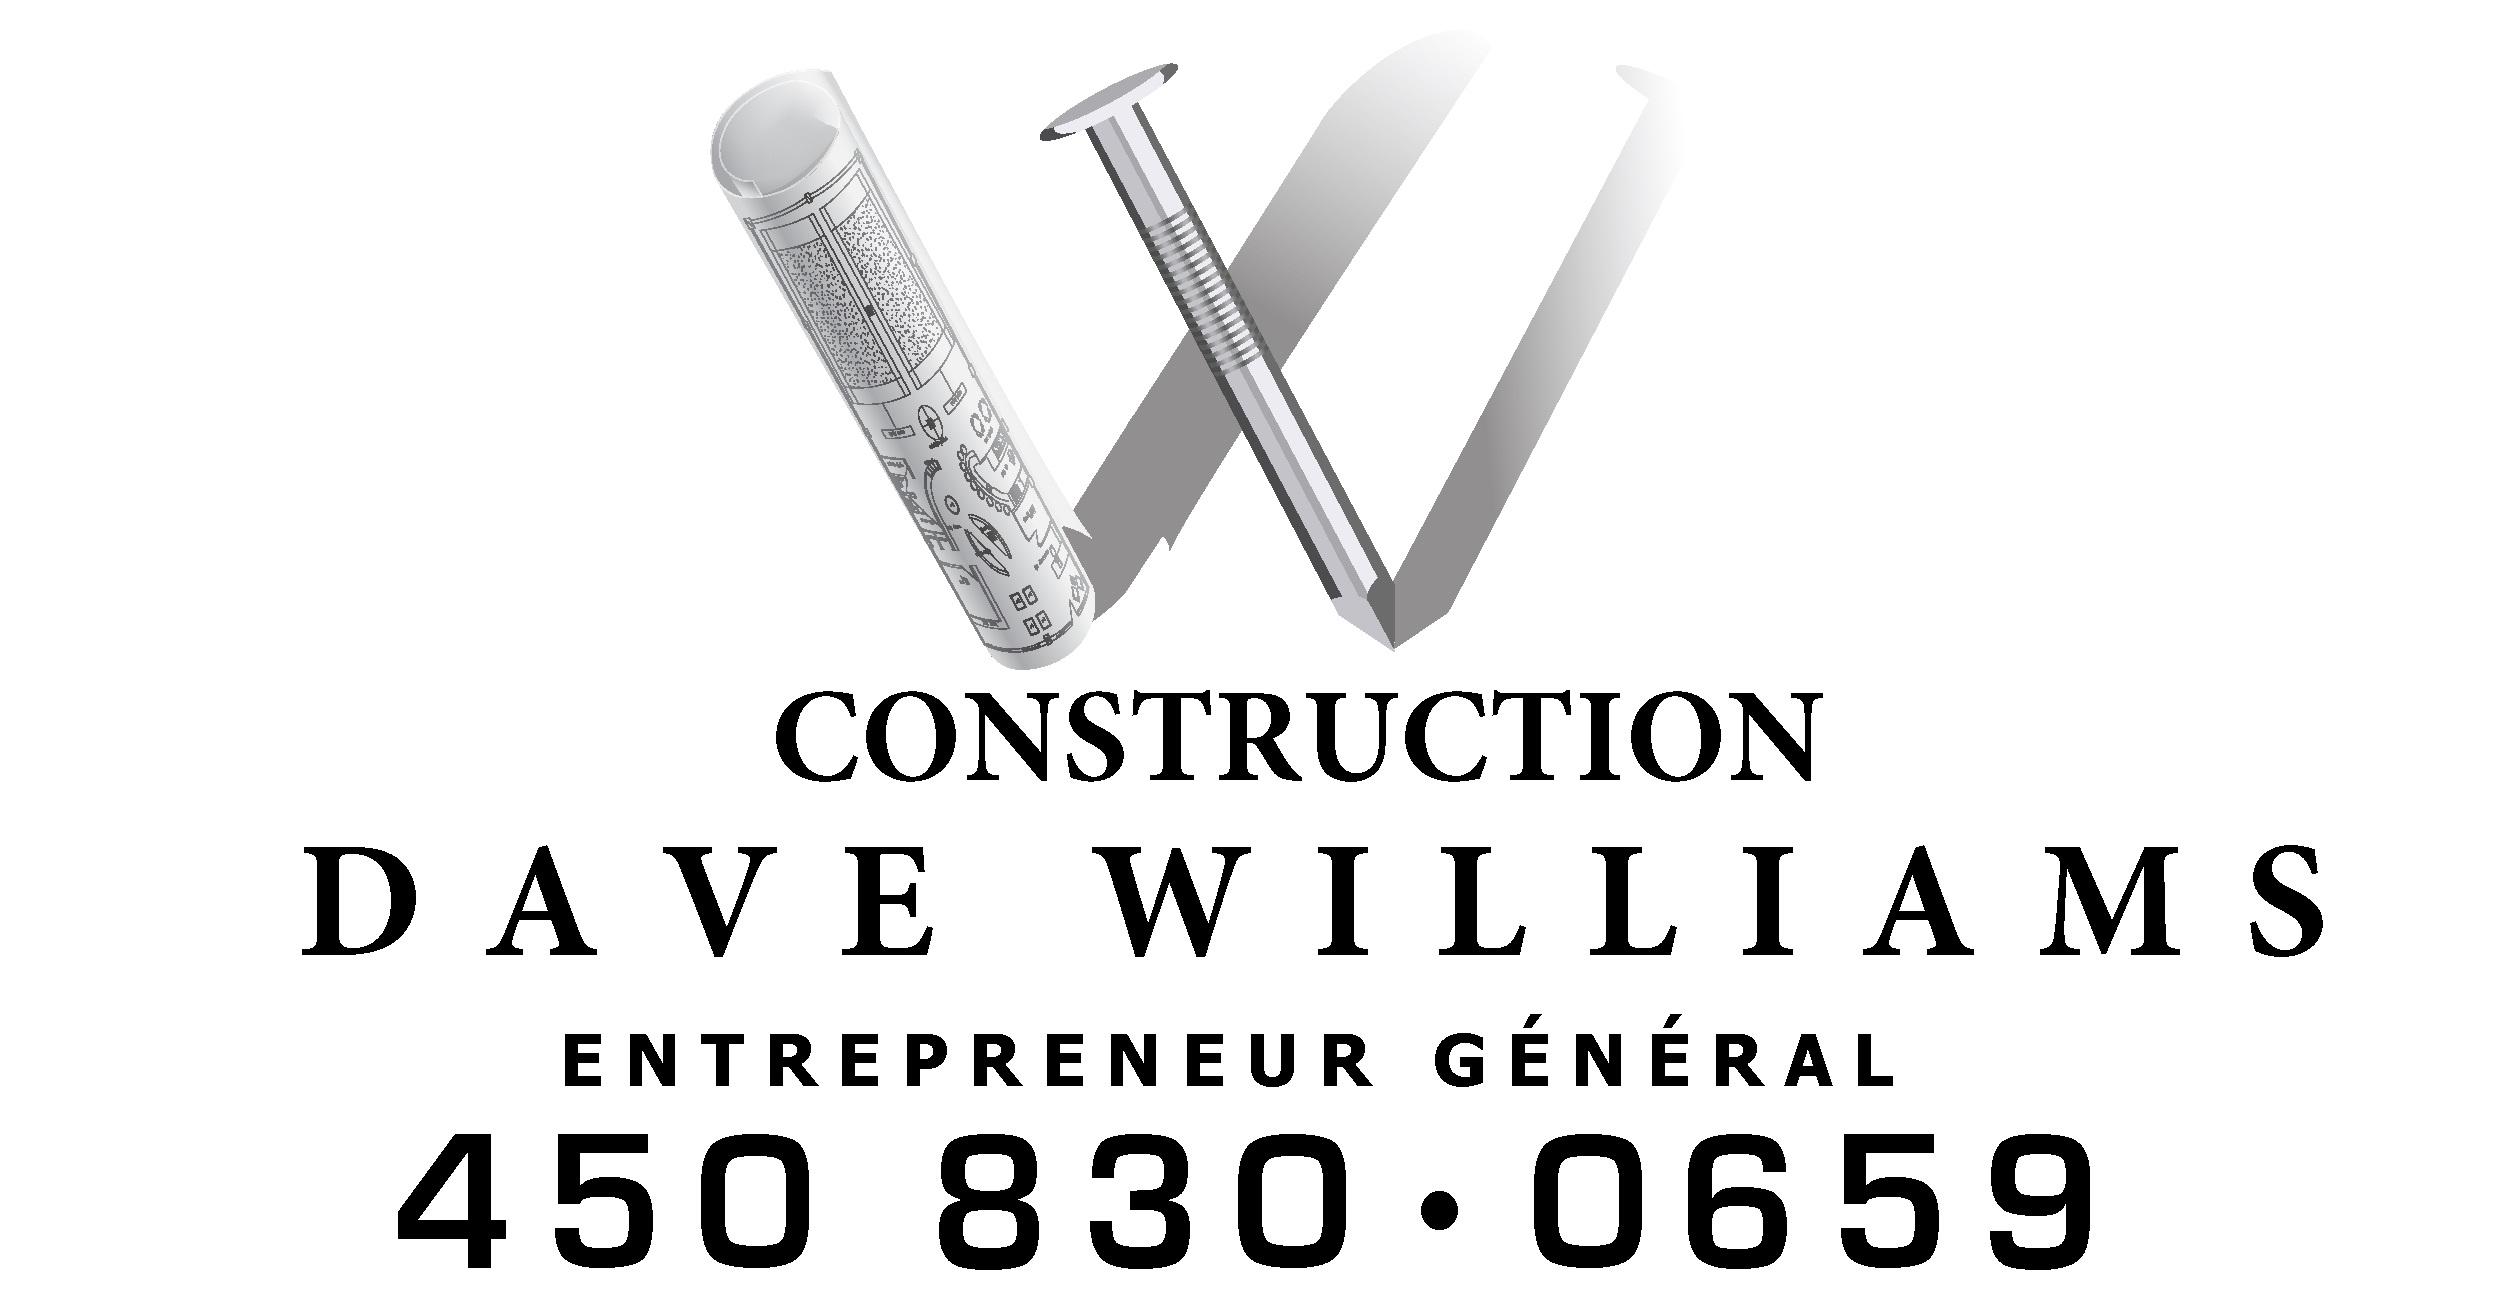 Construction Dave Williams